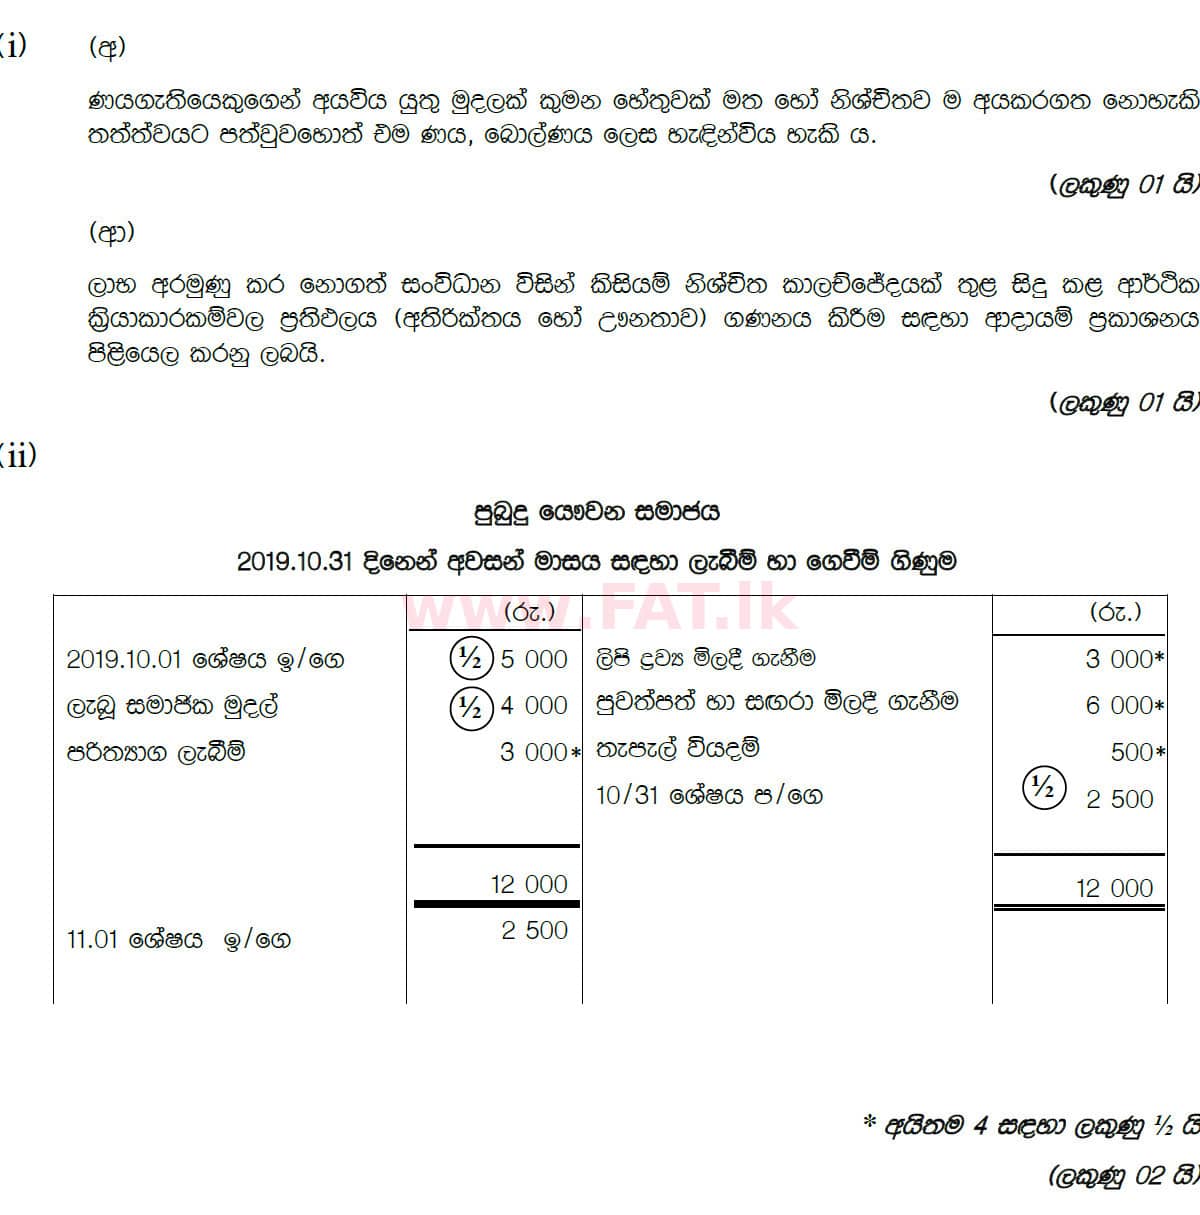 National Syllabus : Ordinary Level (O/L) Business and Accounting Studies - 2019 March - Paper II (සිංහල Medium) 7 5900